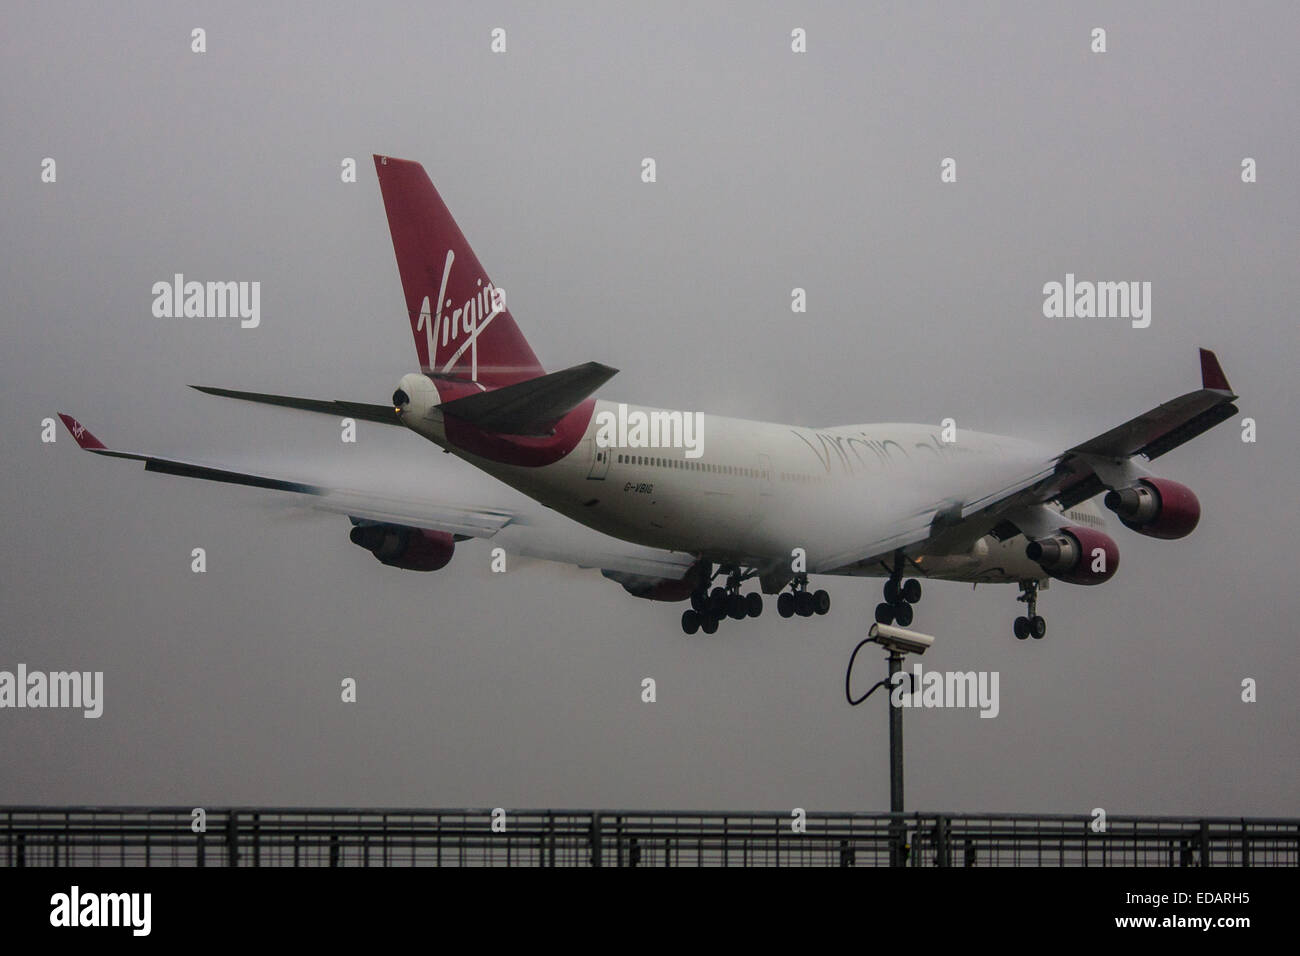 January 3rd 2015, Heathrow Airport, London. Low cloud and rain provide ideal conditions to observe wake vortexes and 'fluffing' as moisture condenses over the wings of landing aircraft. With the runway visible only at the last minute, several planes had to perform a 'go-round', abandoning their first attempts to land. PICTURED: Water vapour 'fluffing' over the wings of a Virgin Atlantic Boeing 747 as it lands on Heathrow's runway 27L Stock Photo